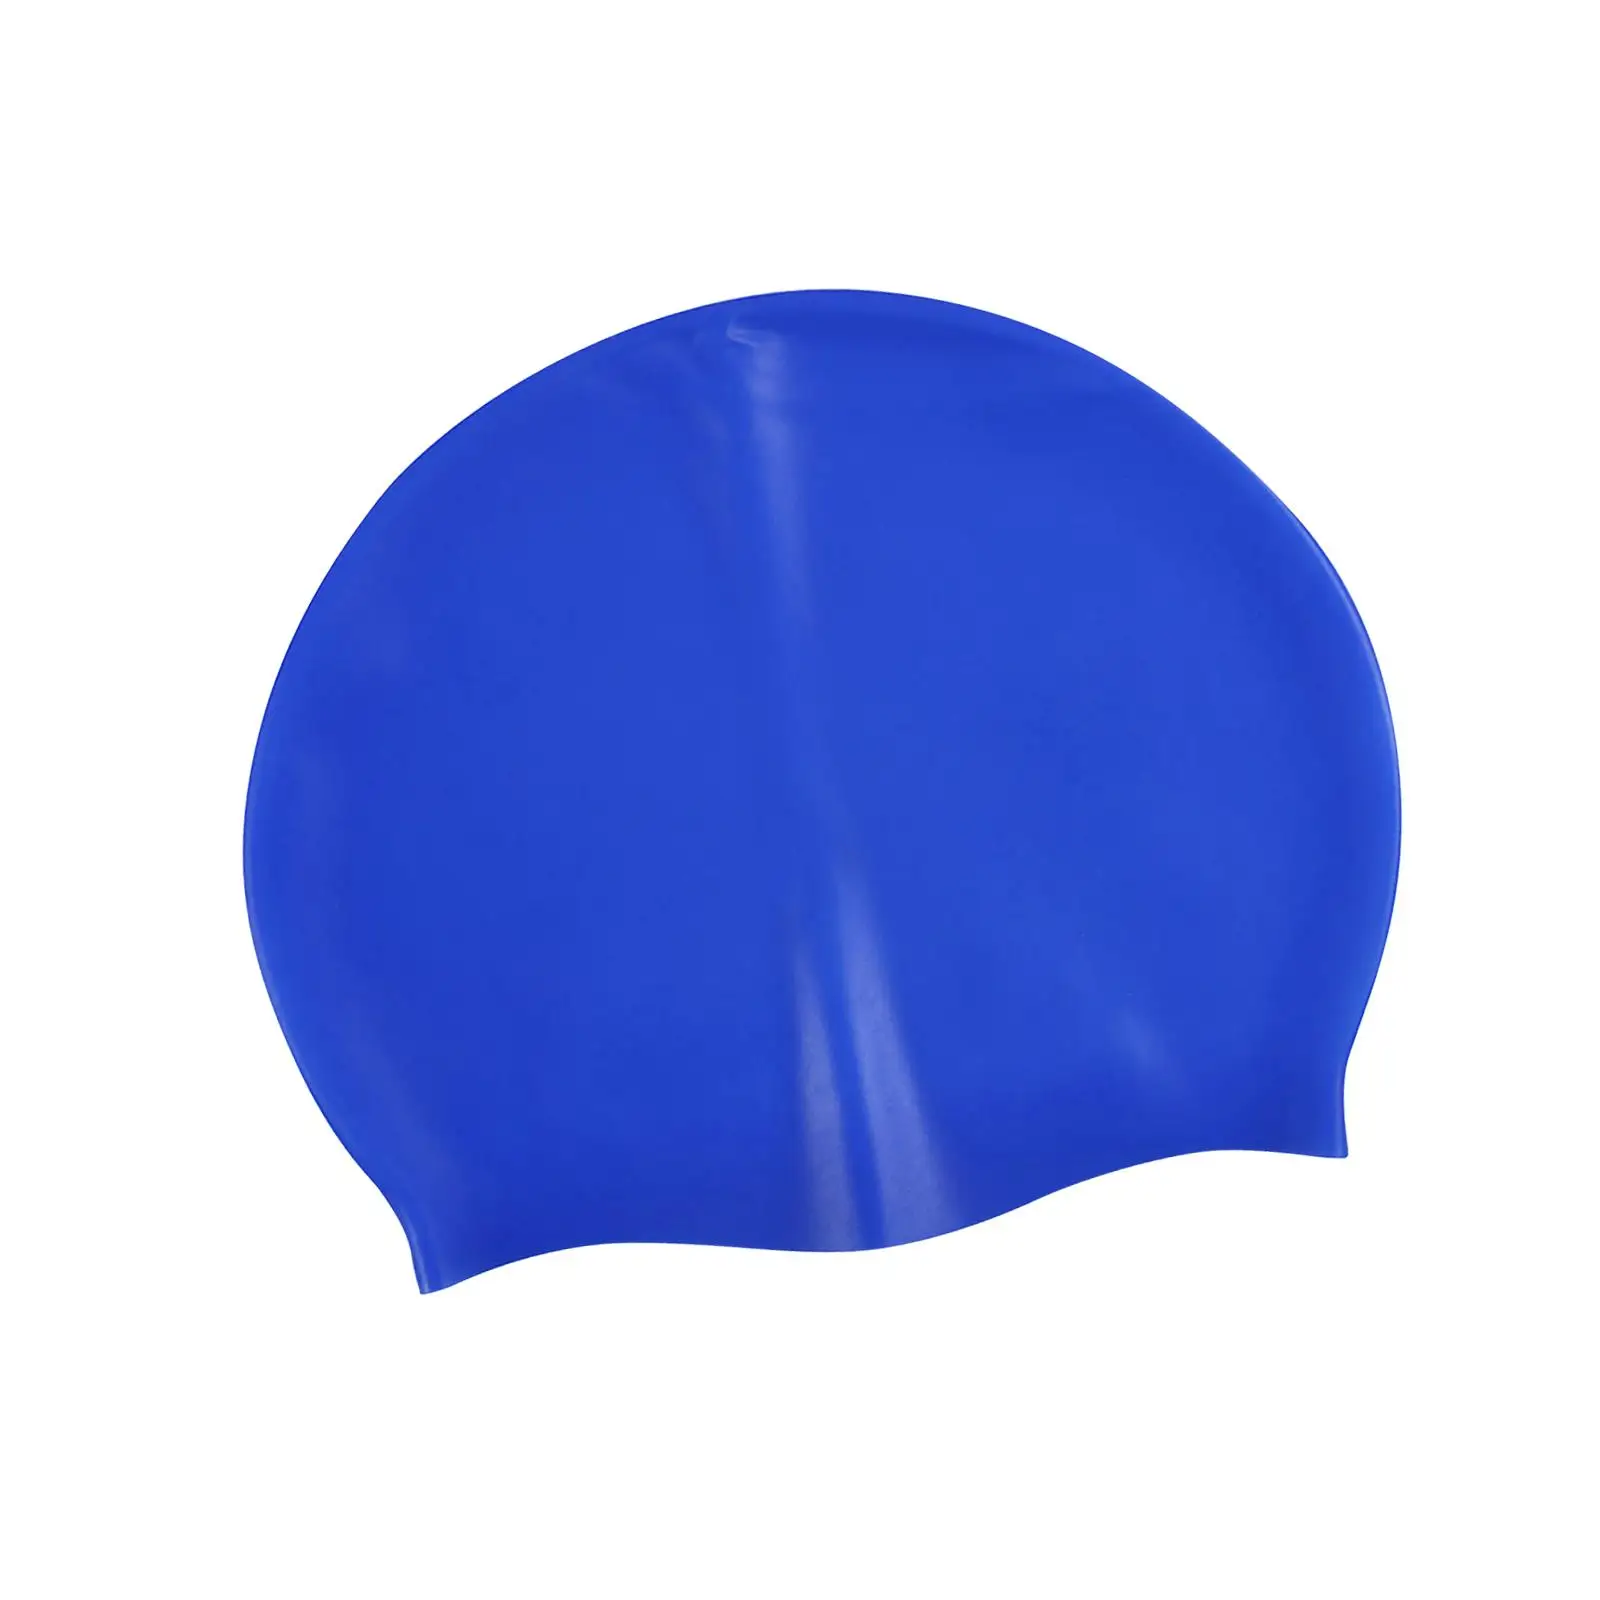 Pure Color Swimming Cap Headwear Comfortable Silicone Swim Cap Hair Protection for Surfing Long Hair Canoeing Training Women Men